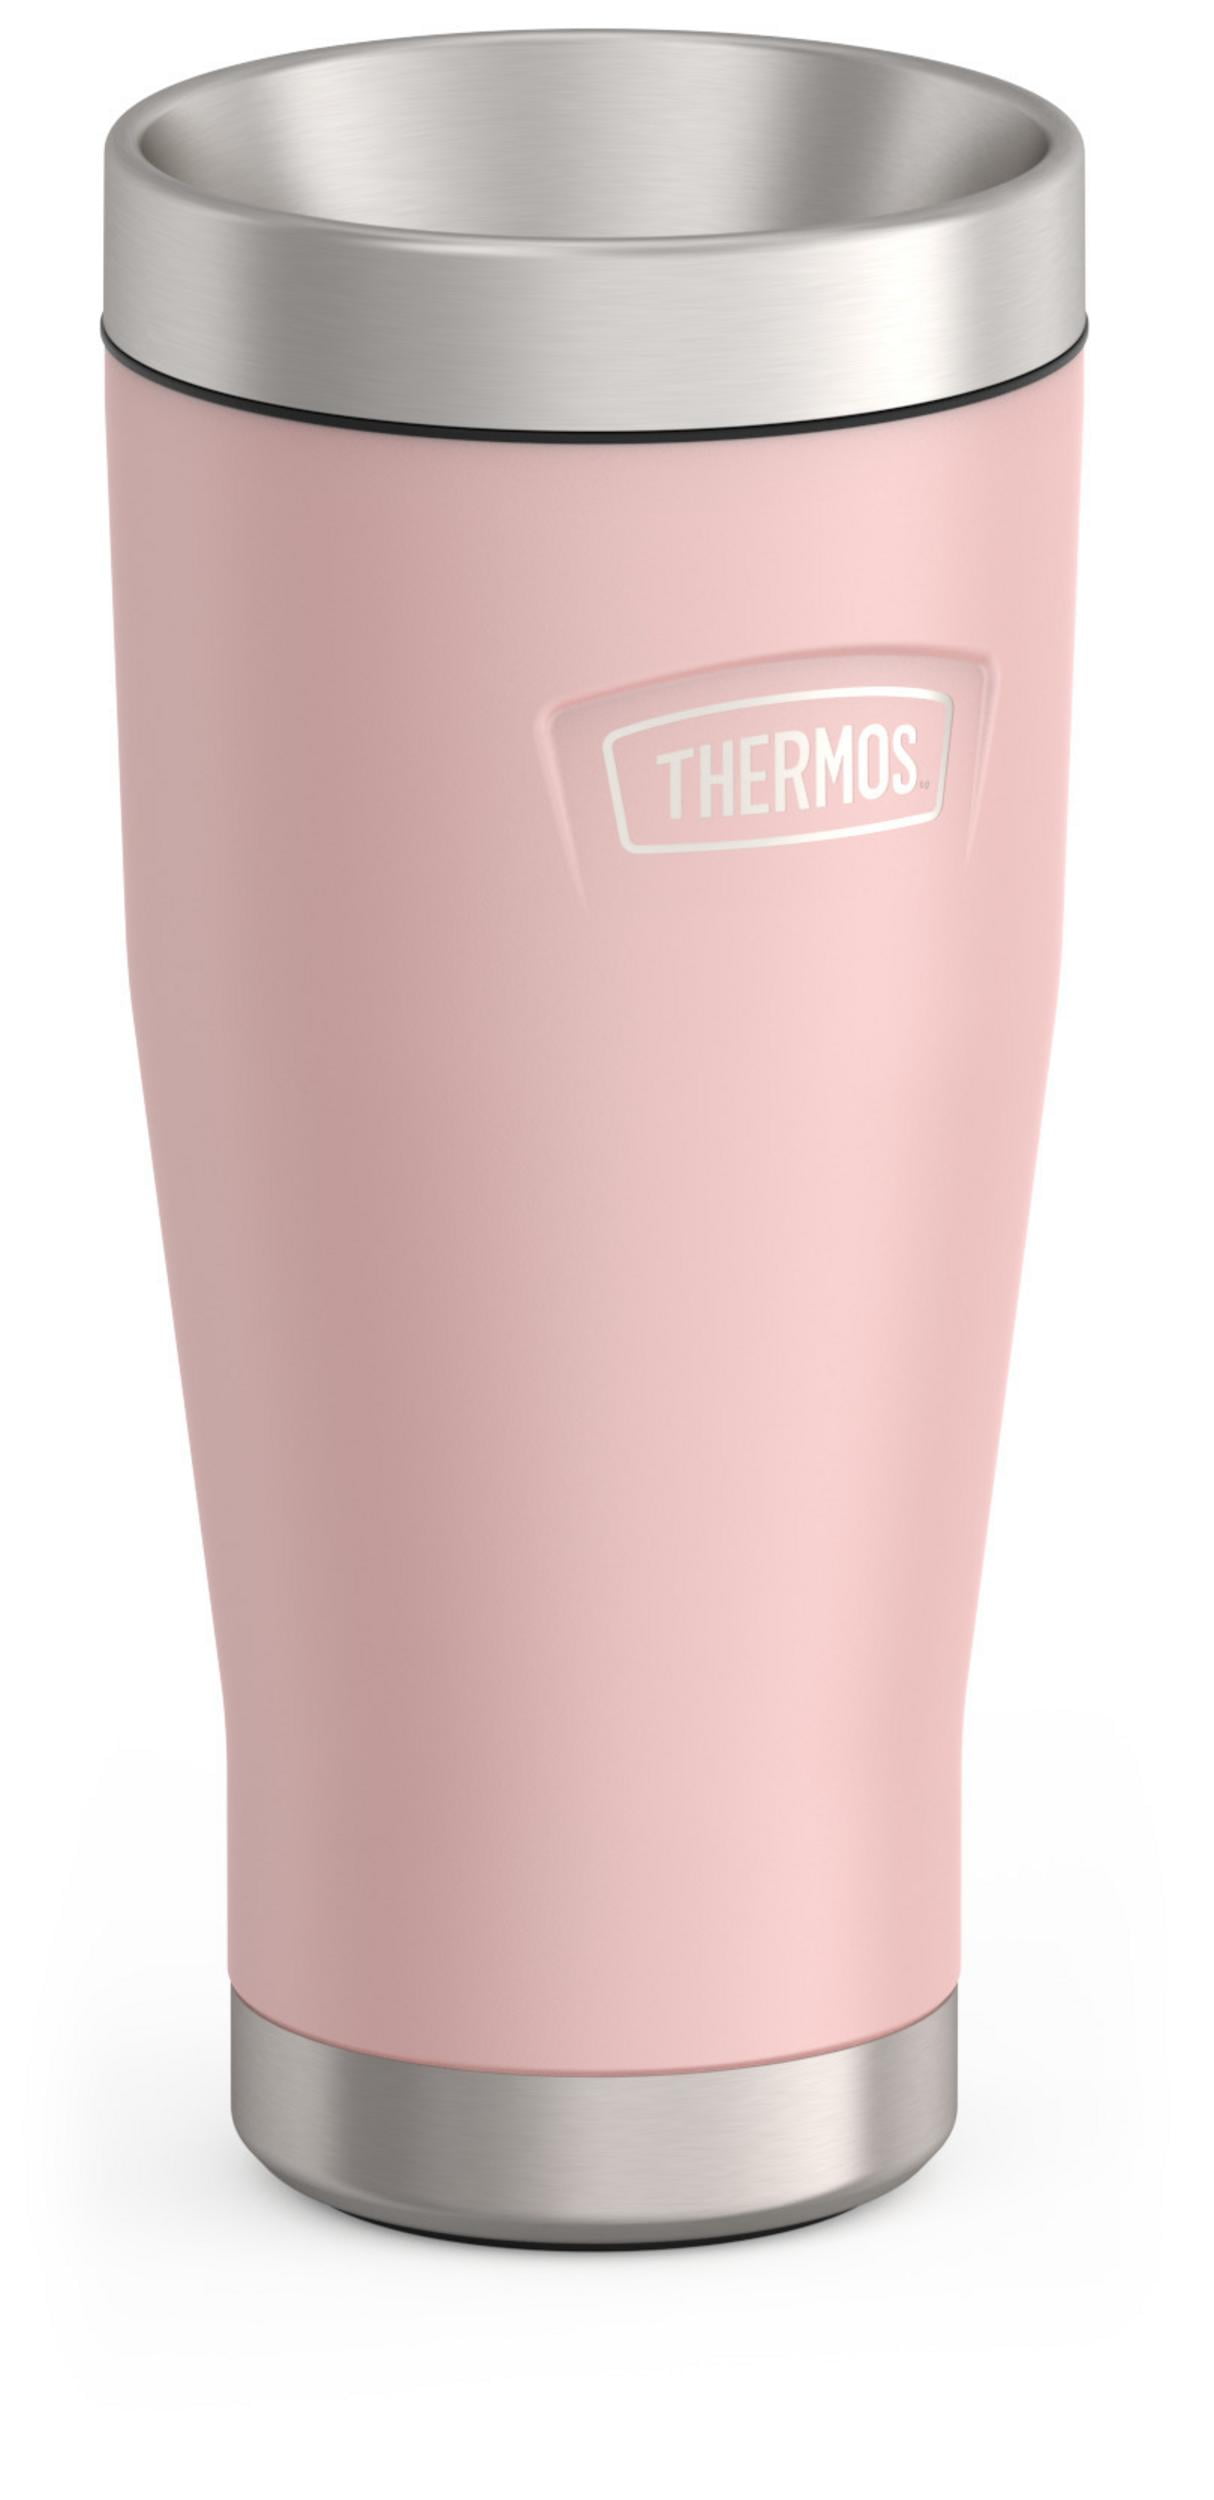 Thermos 16 Oz. Vacuum Insulated Stainless Steel Travel Tumbler - Pink Blush  : Target